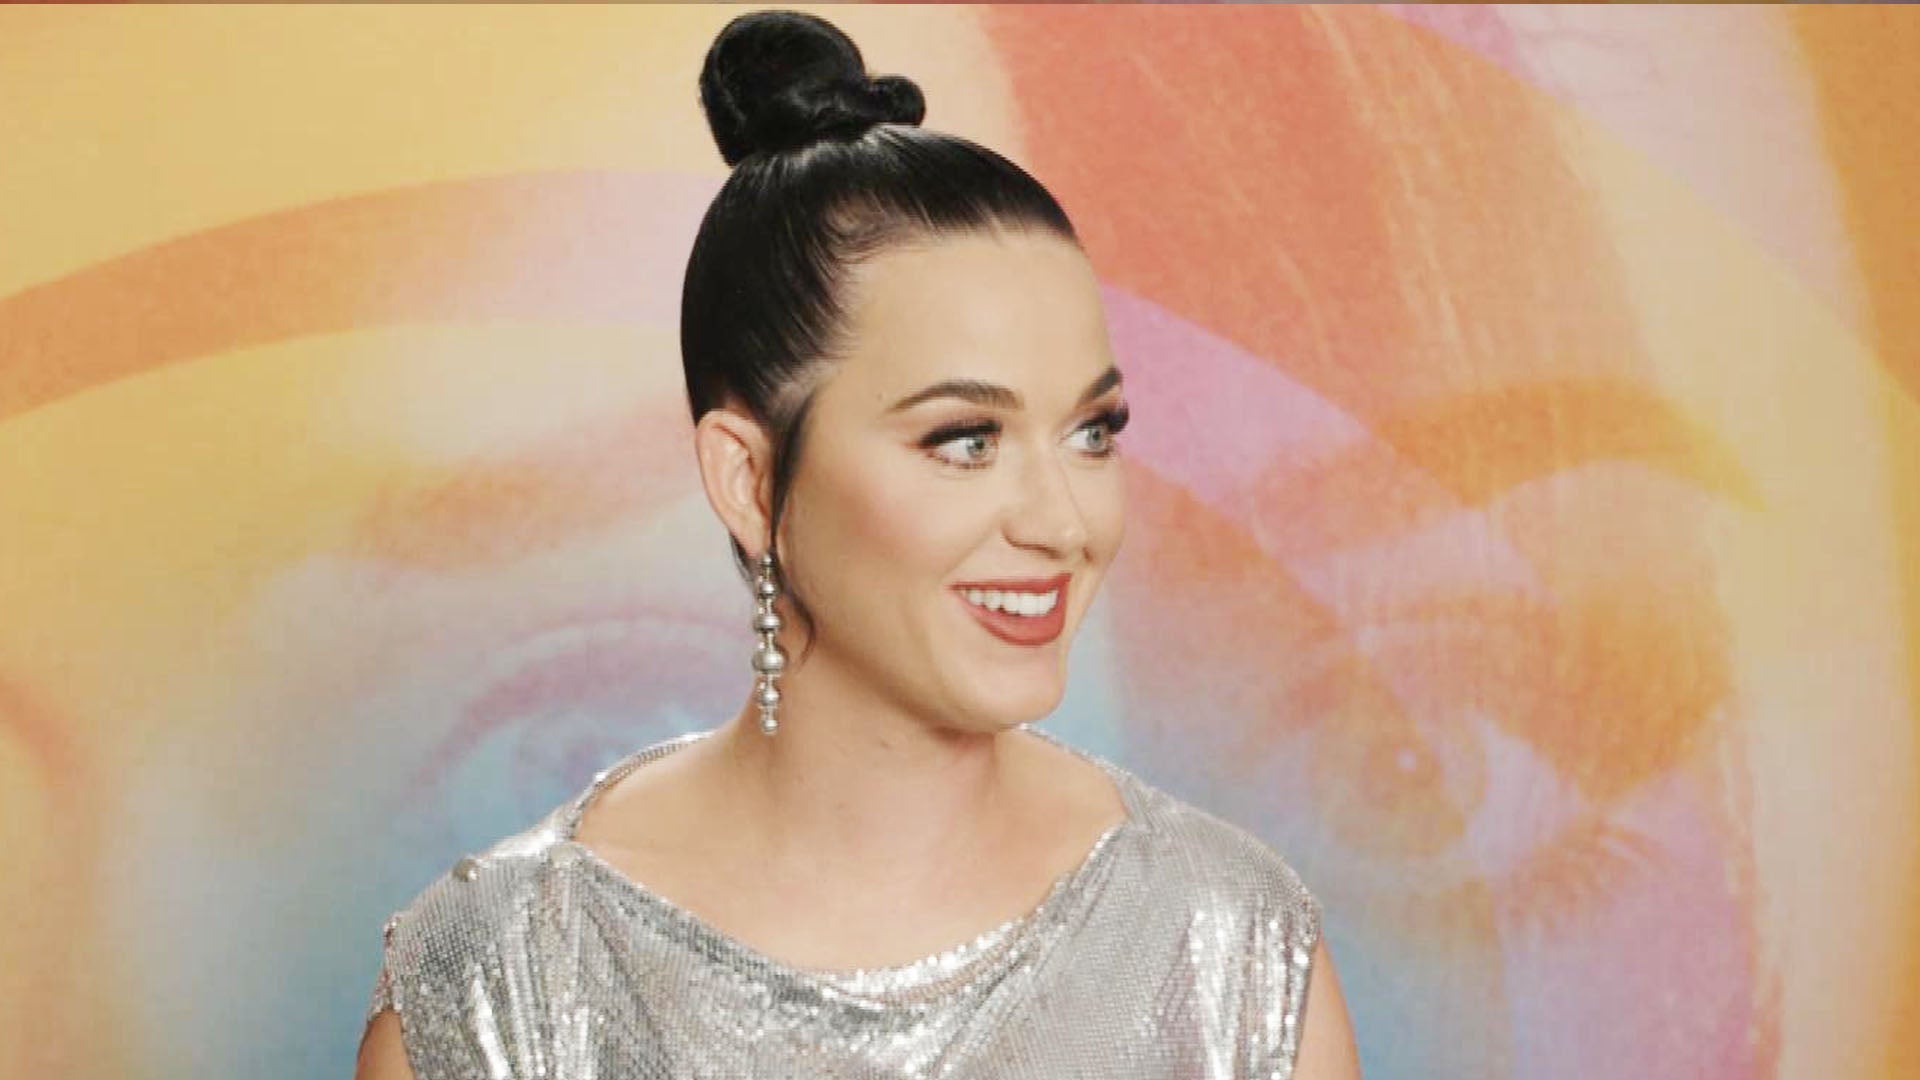 Katy Perry Teases New Music Video by Posing Topless With Long Wig -- See Orlando Blooms Funny Response Entertainment Tonight picture